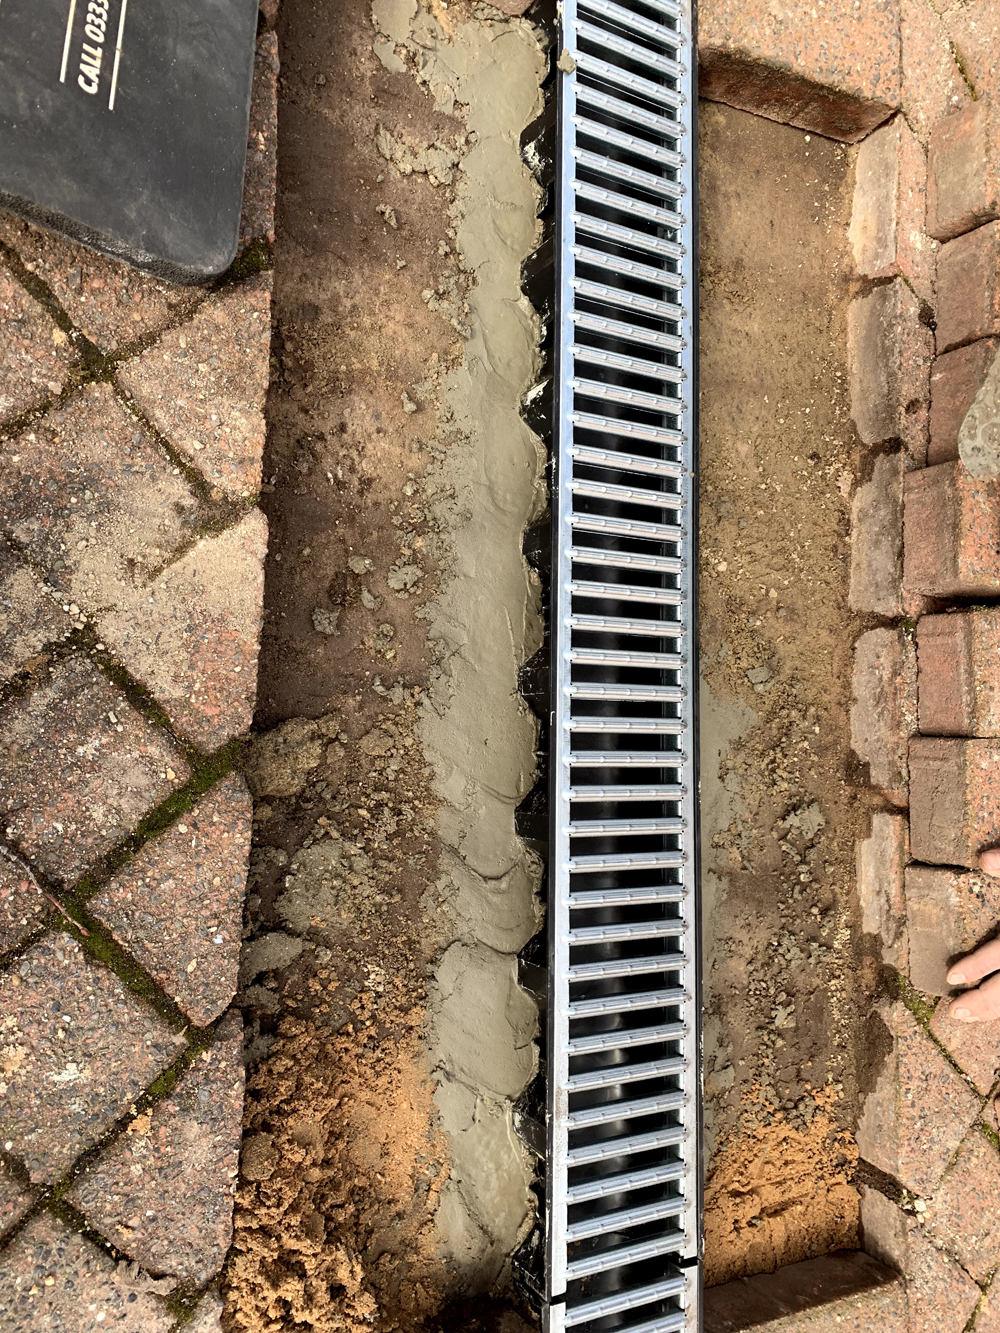 Driveway drain channel installation at an apartment block